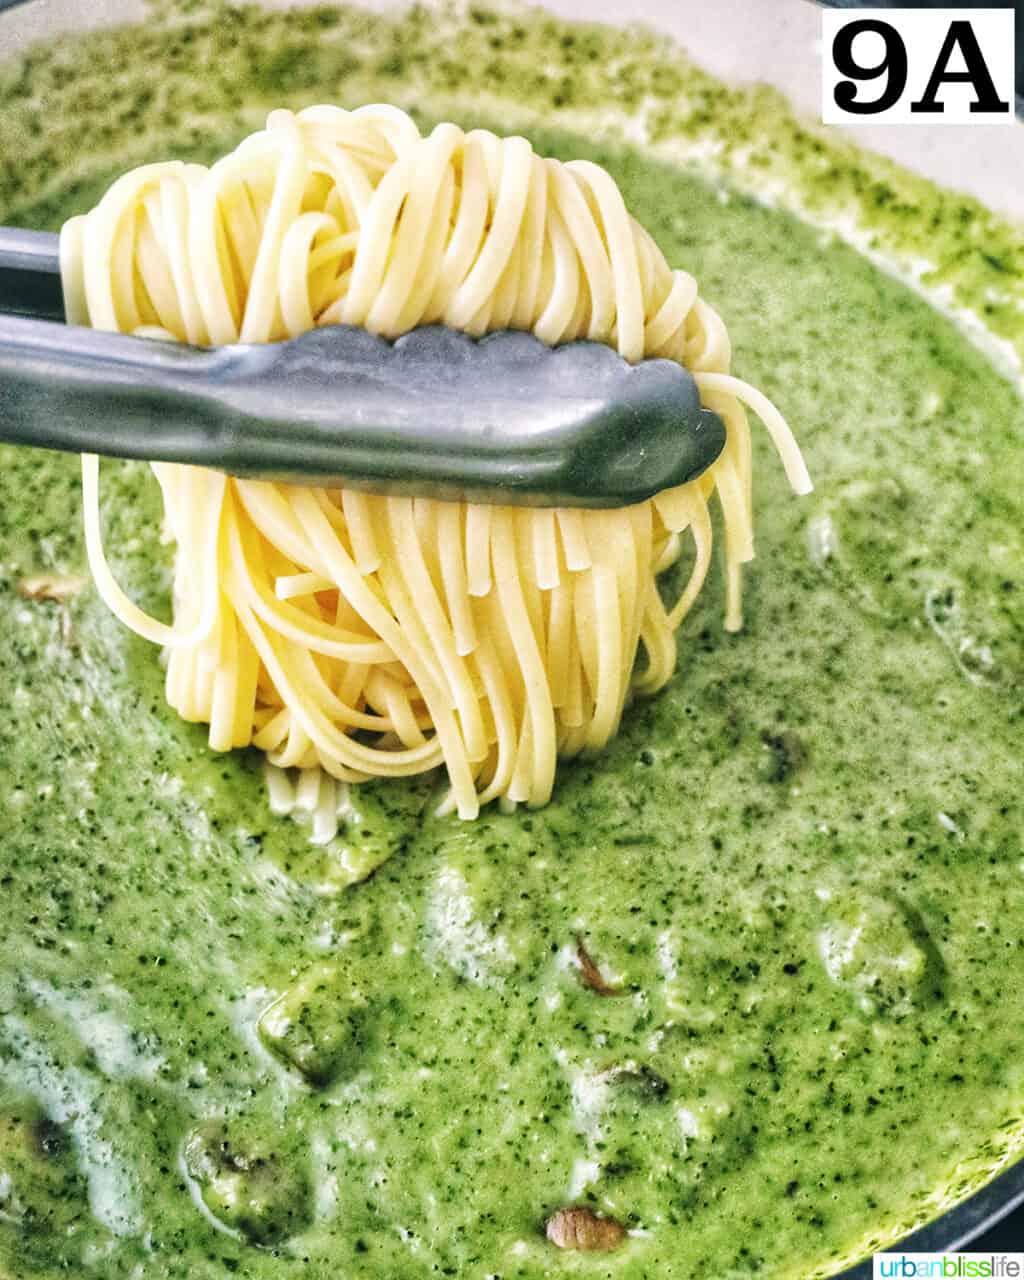 kitchen tongs lowering linguine pasta into pesto sauce with chopped mushrooms.